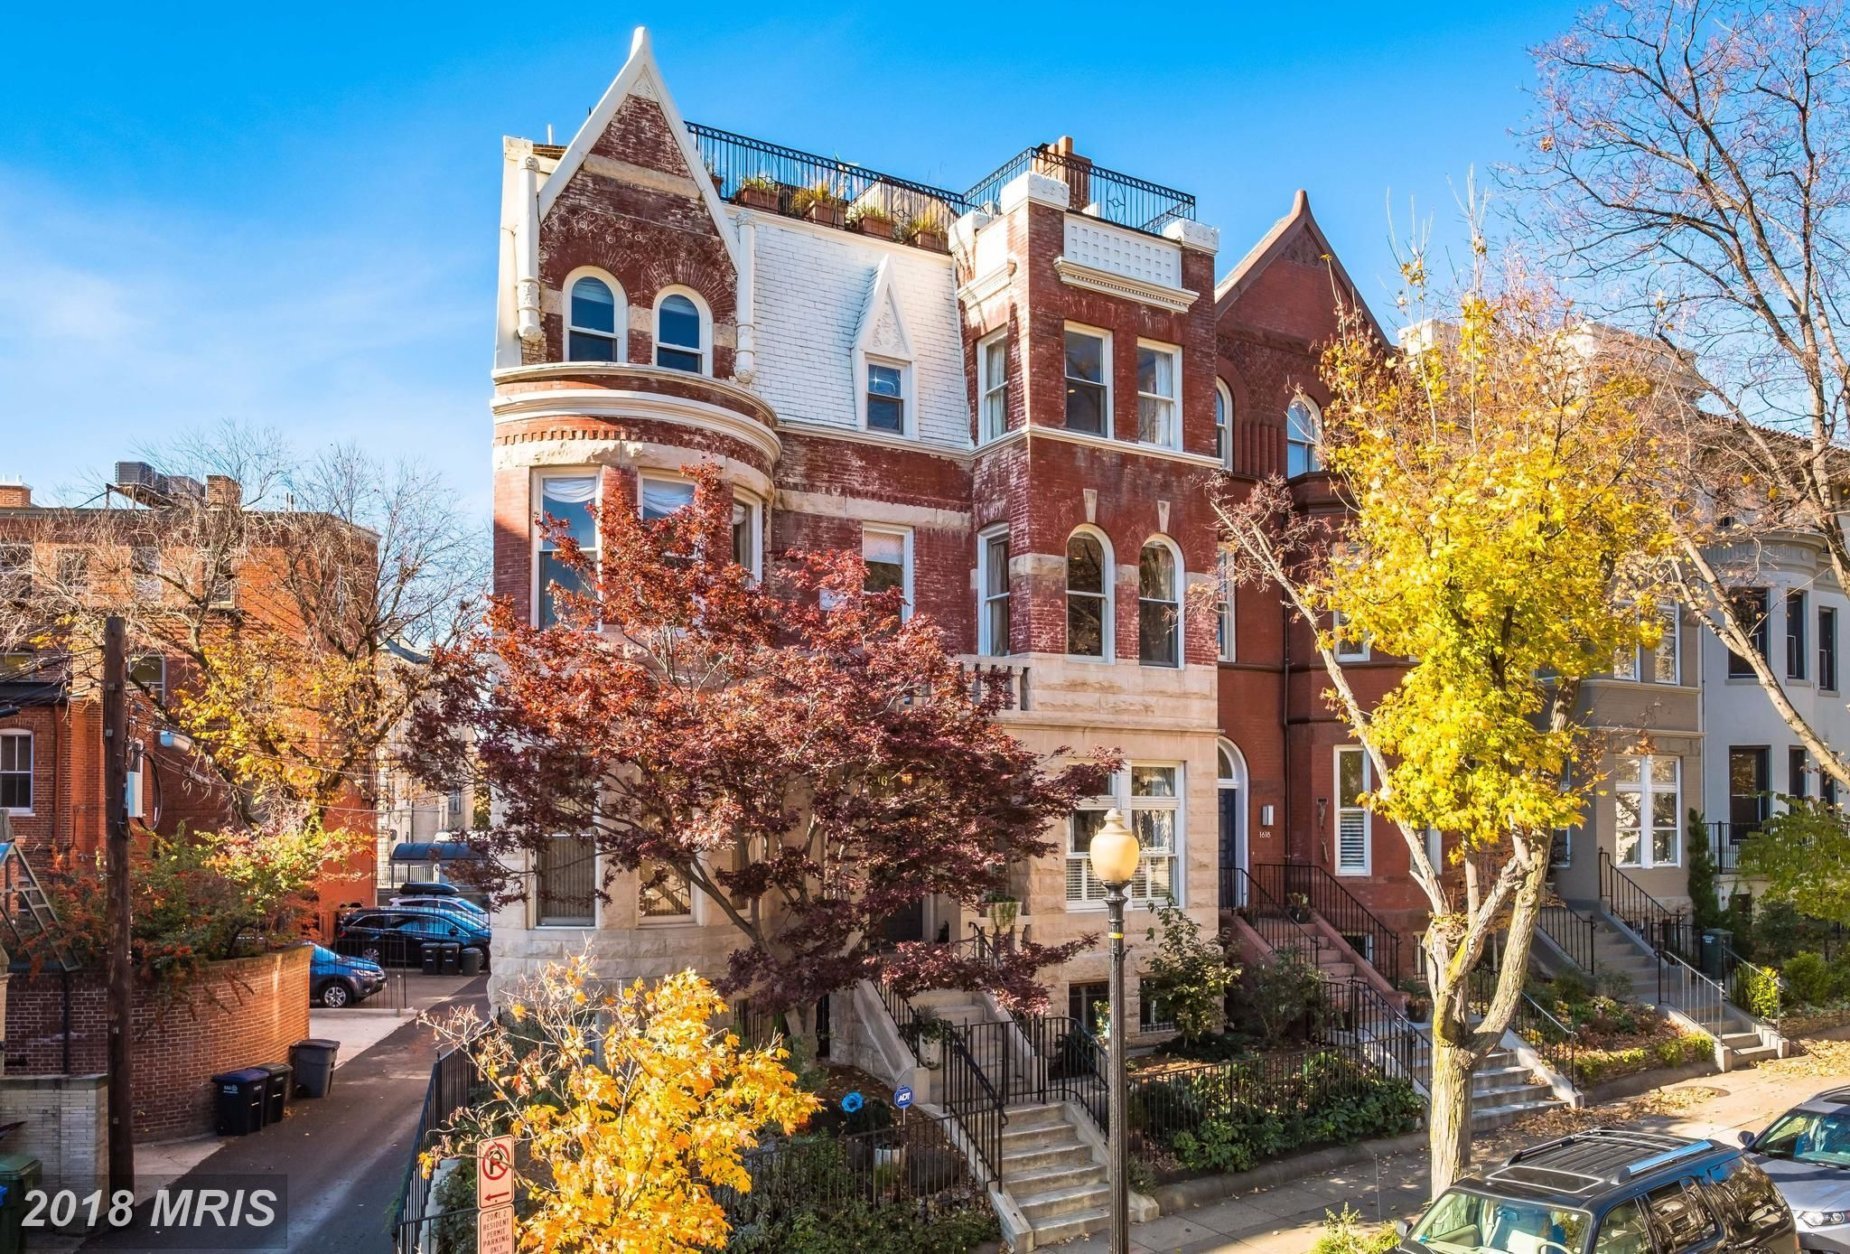  8. $2,550,000

1616 22nd Street NW

Washington, D.C. 

This semi-detached victorian home was built in 1906 and includes five bedrooms and four full bathrooms. 

(Courtesy Bright MLS)

